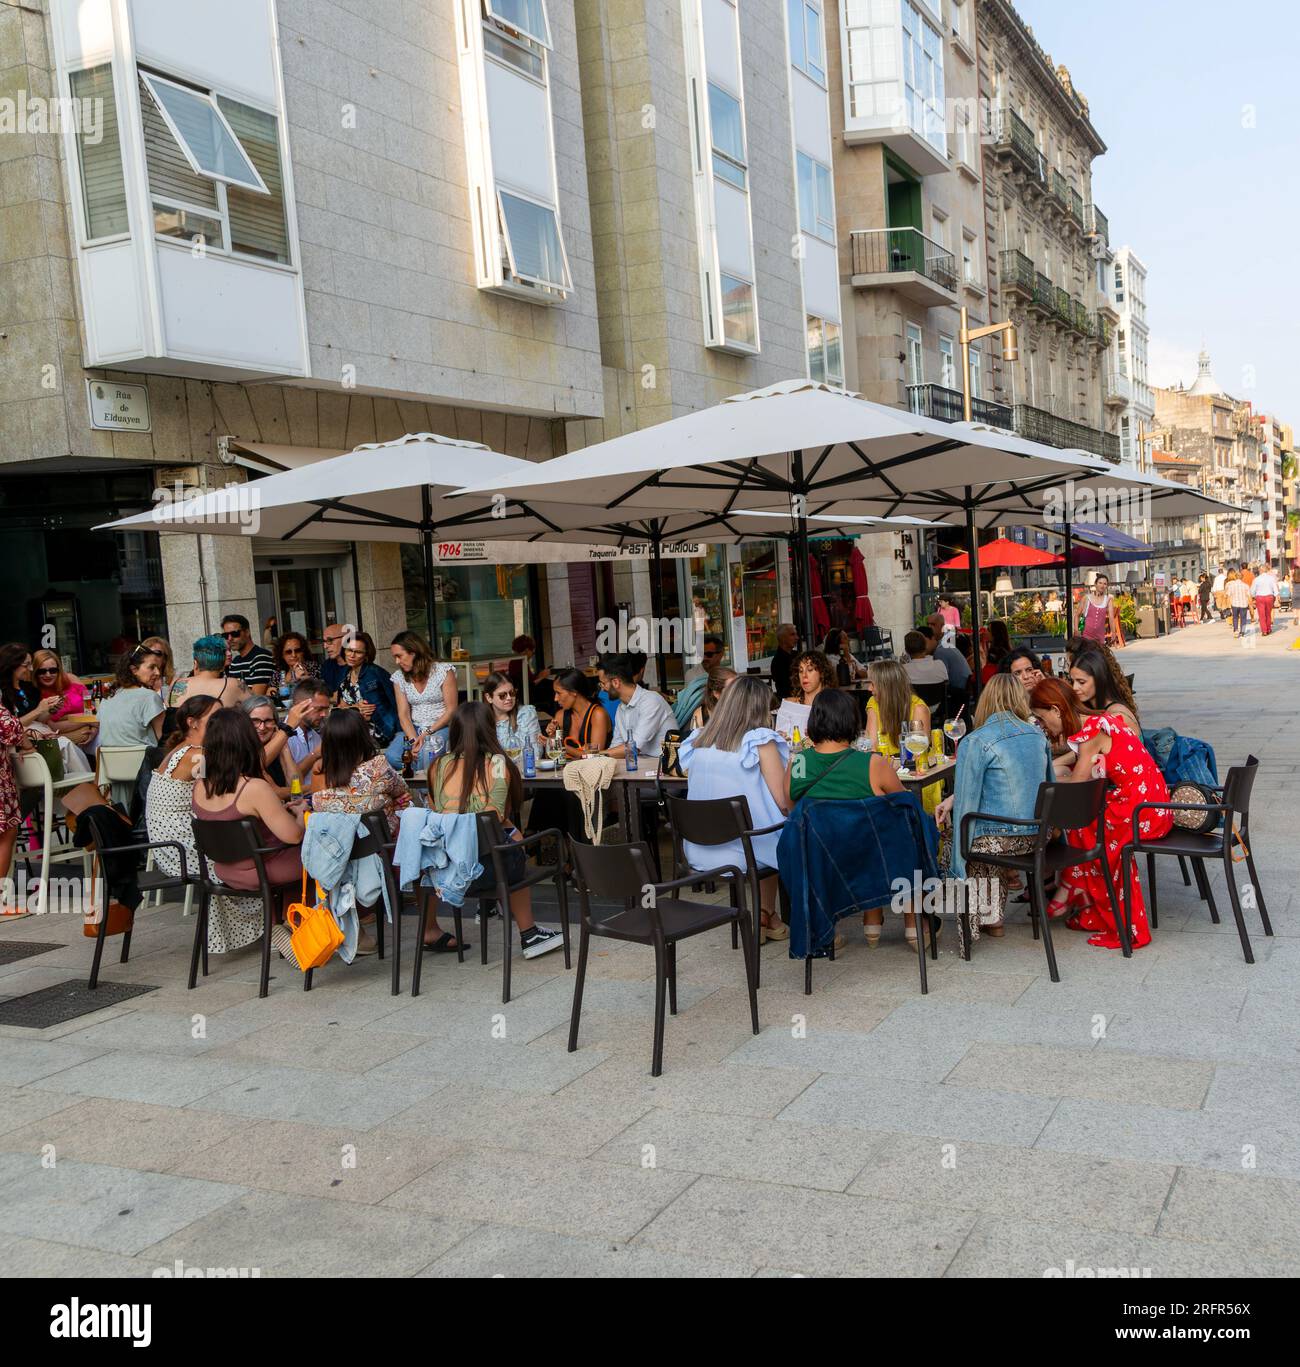 A large group of people sitting around  table at street cafe bar in the old town city centre of Vigo, Galicia, Spain Stock Photo